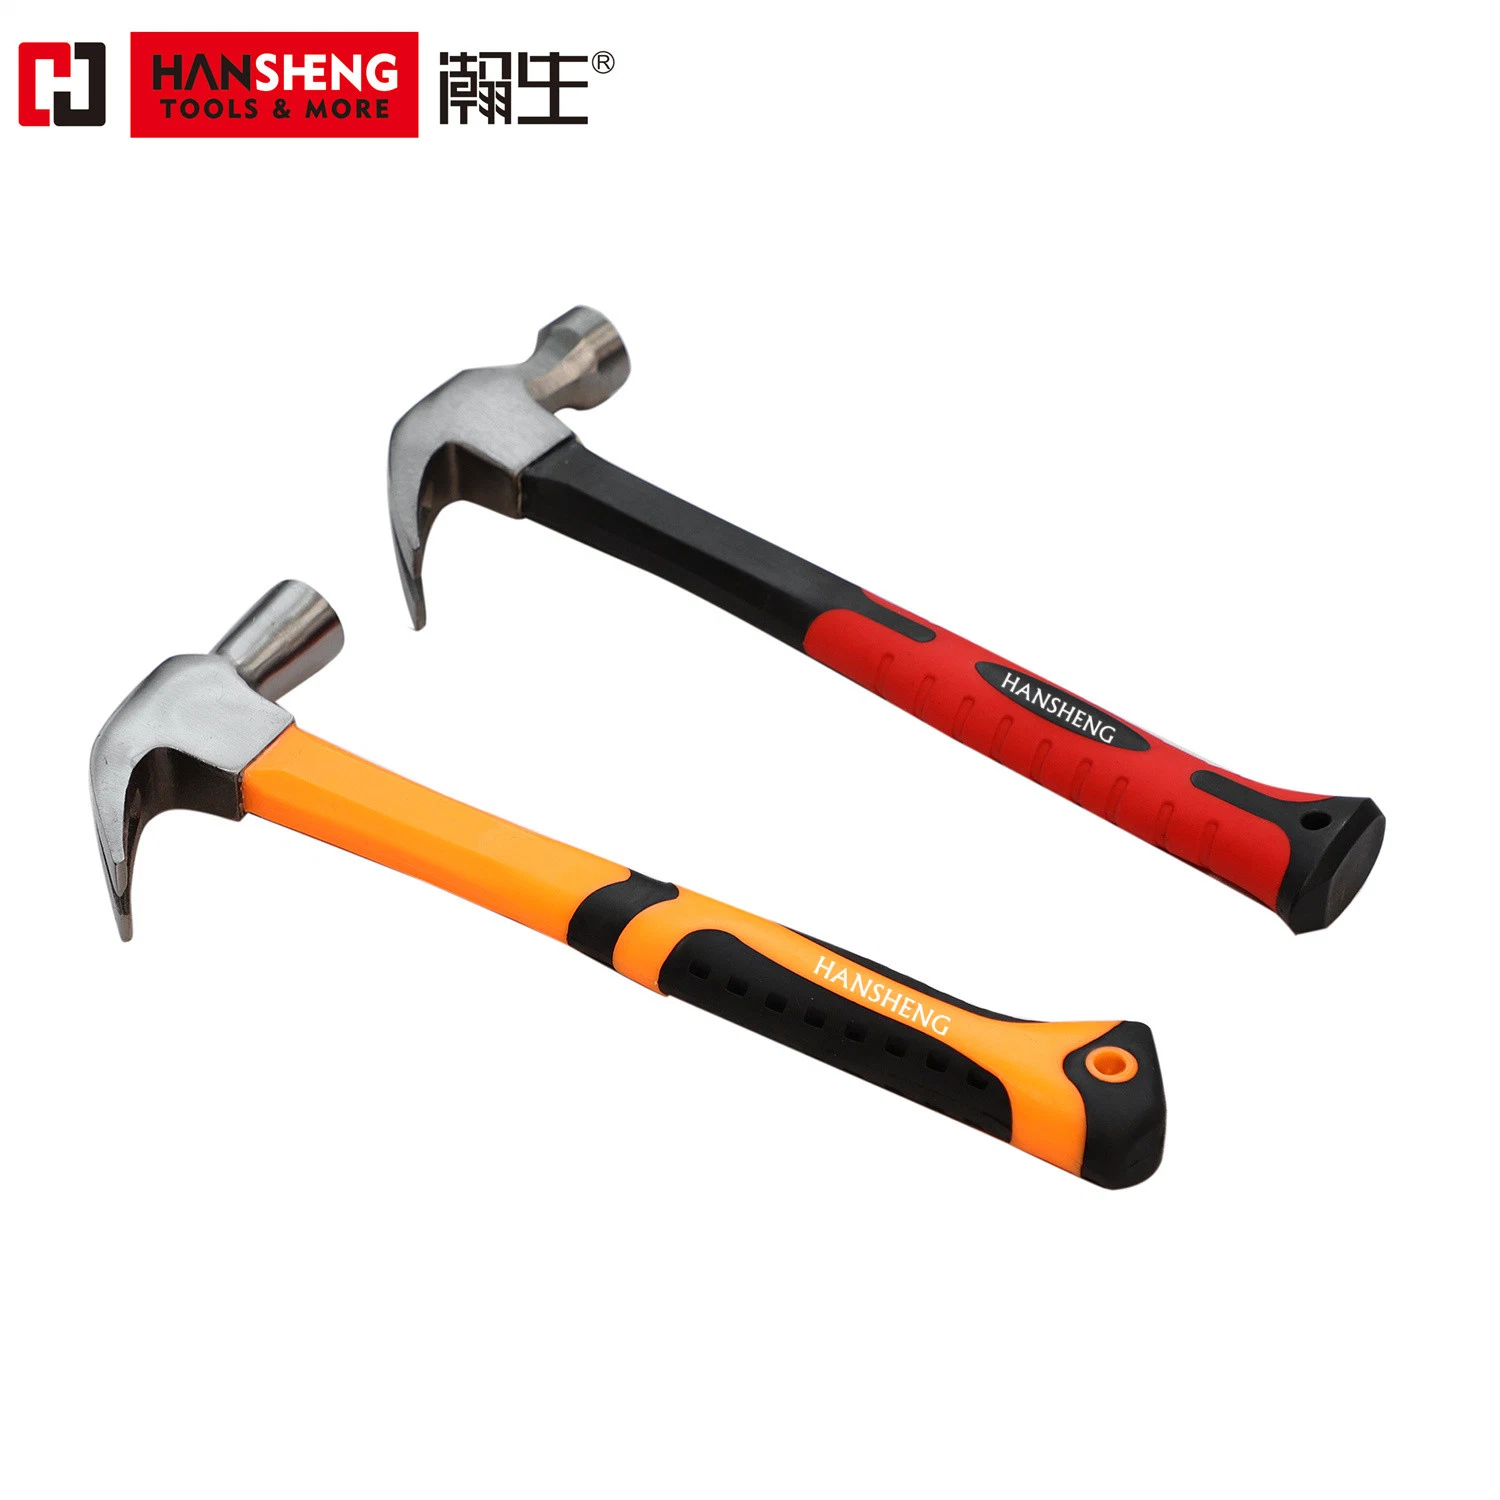 Professional Hand Tools, Hardware Tools, Made of Carbon Steel, PVC Handle, Machinist Hammers, Rubber Hammer, Claw Hammer, Bricklaye Hammer